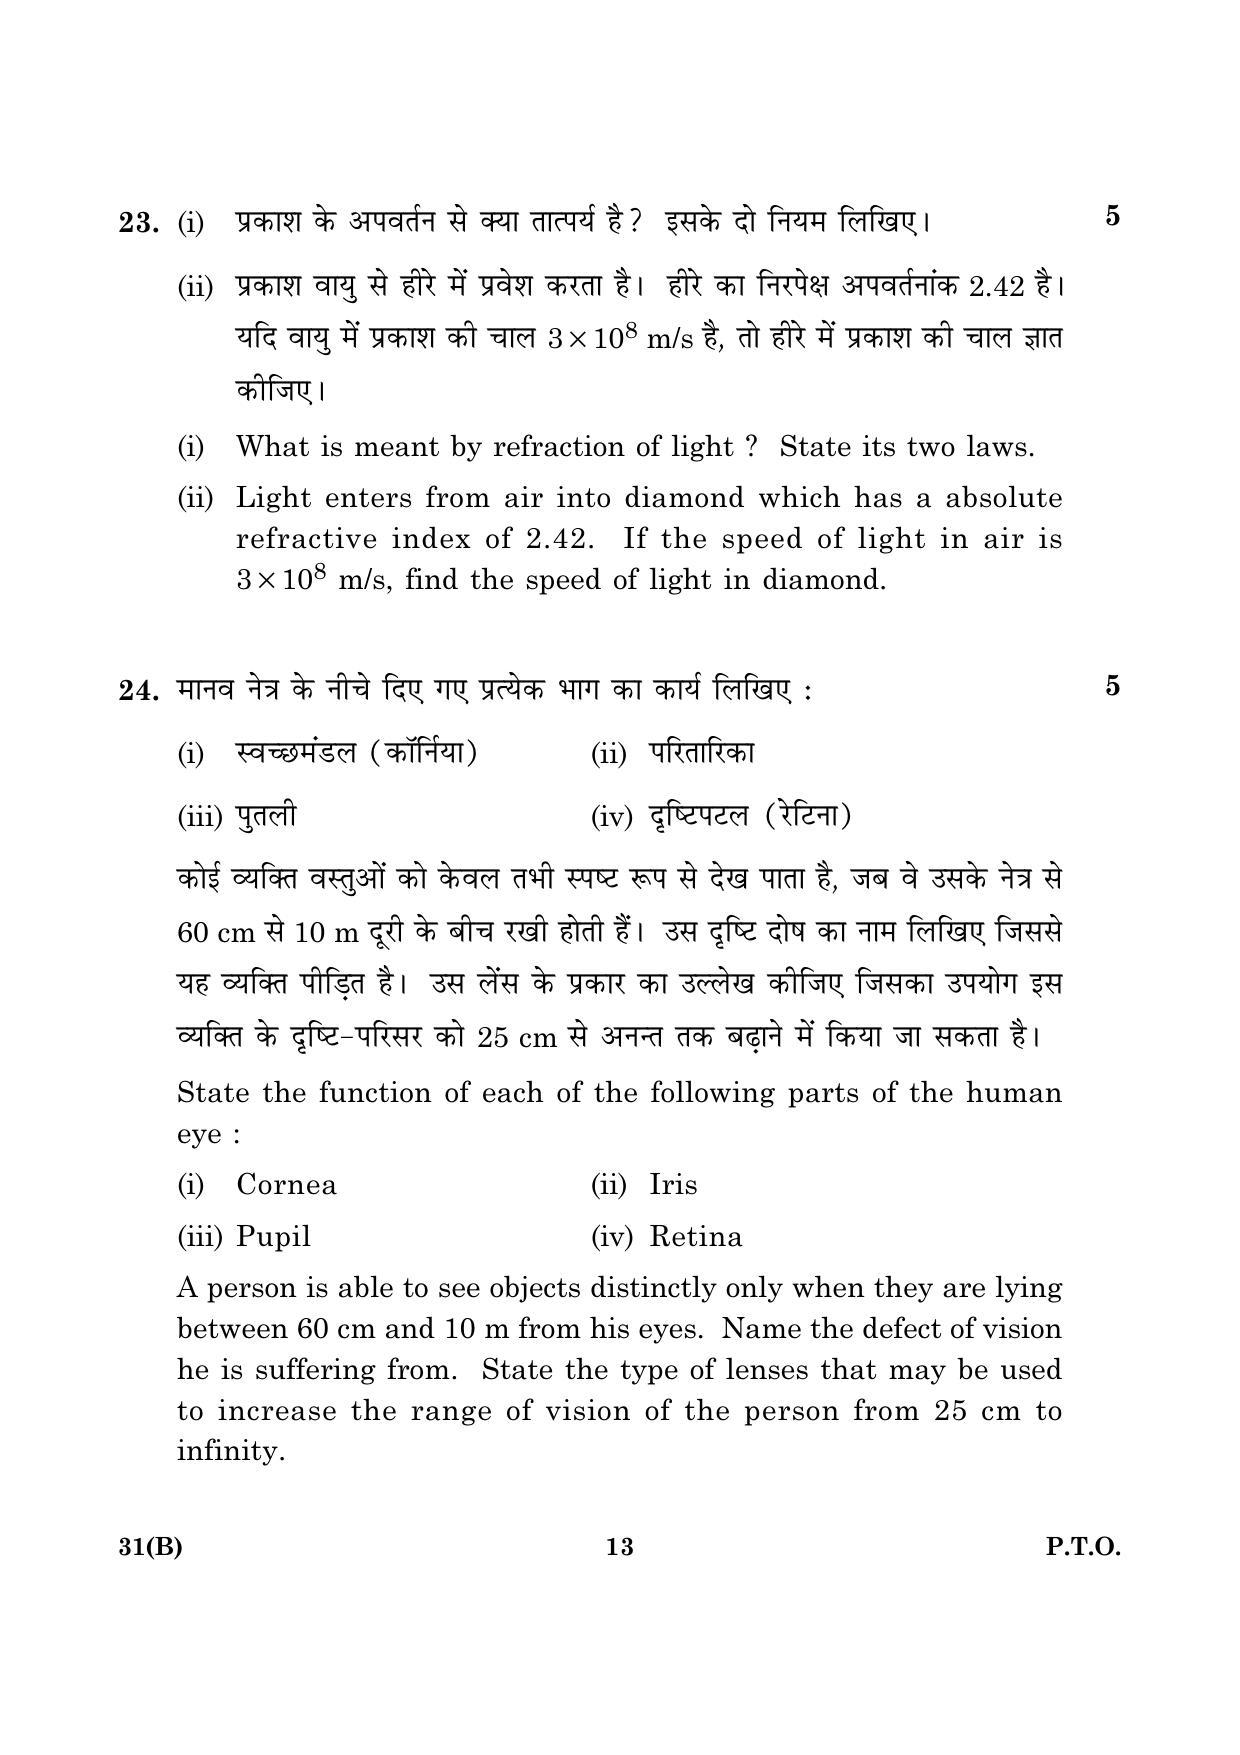 CBSE Class 10 031(B) Science 2016 Question Paper - Page 13